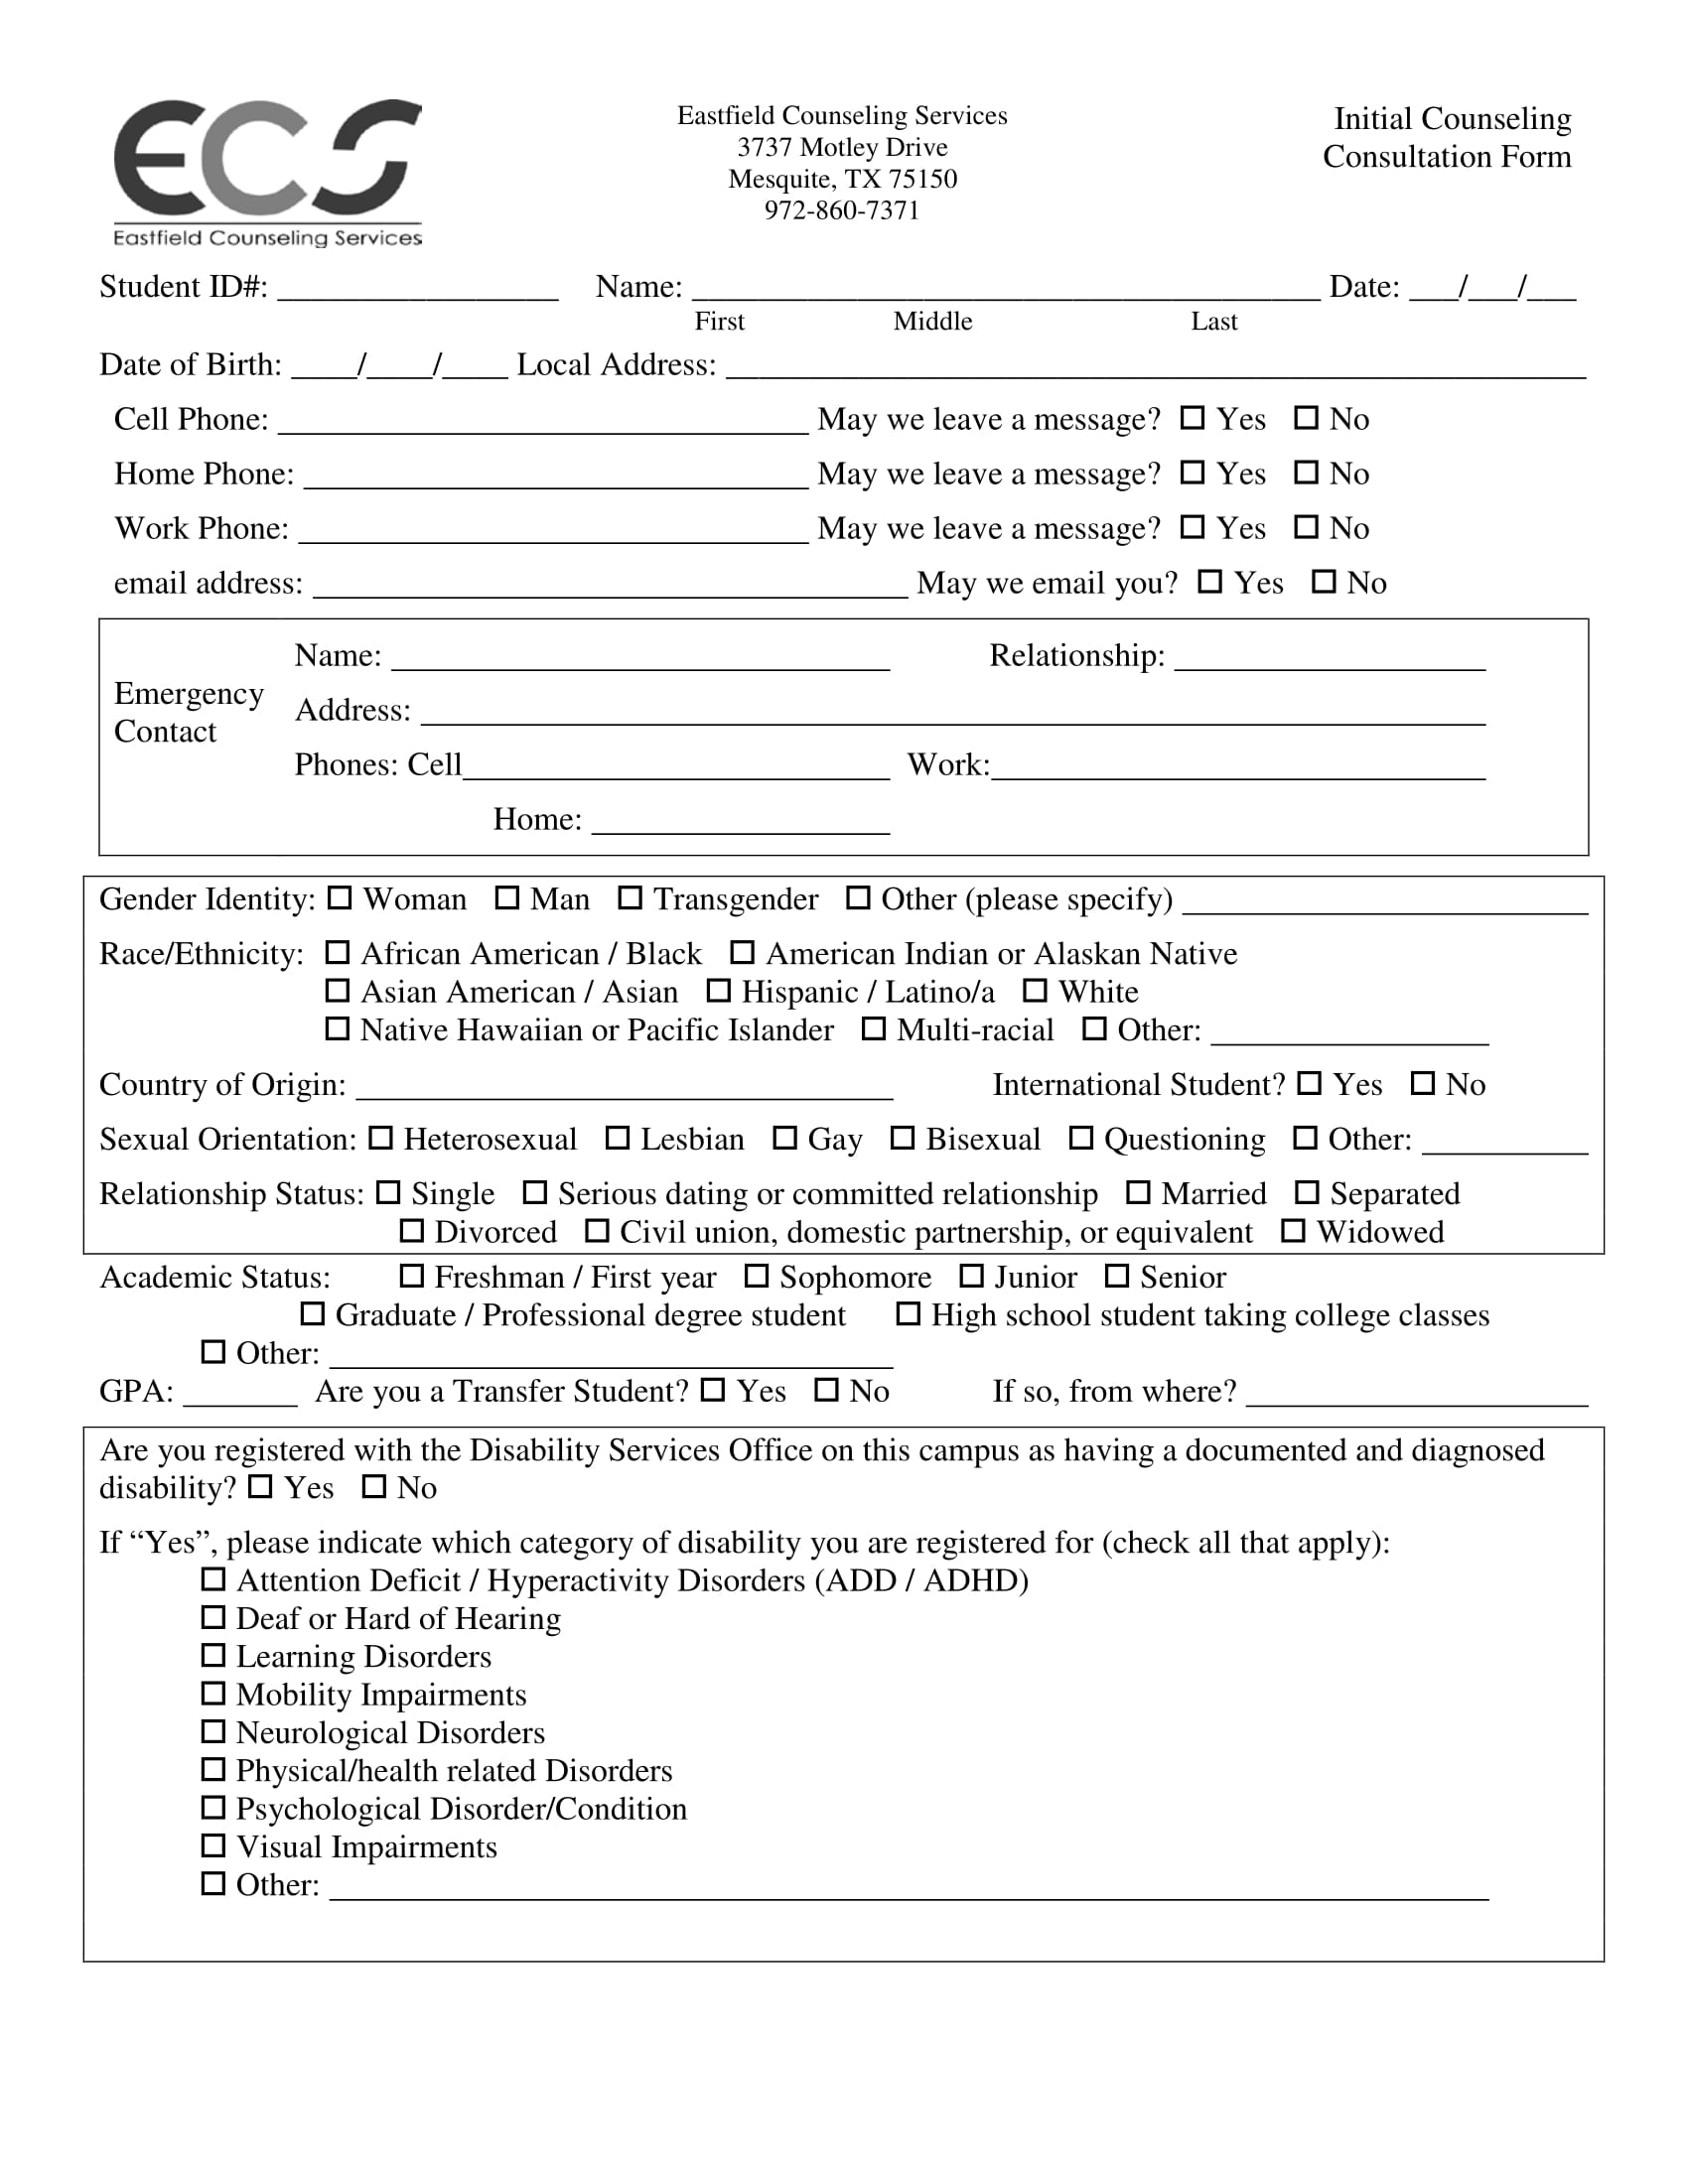 initial counseling statement form 1